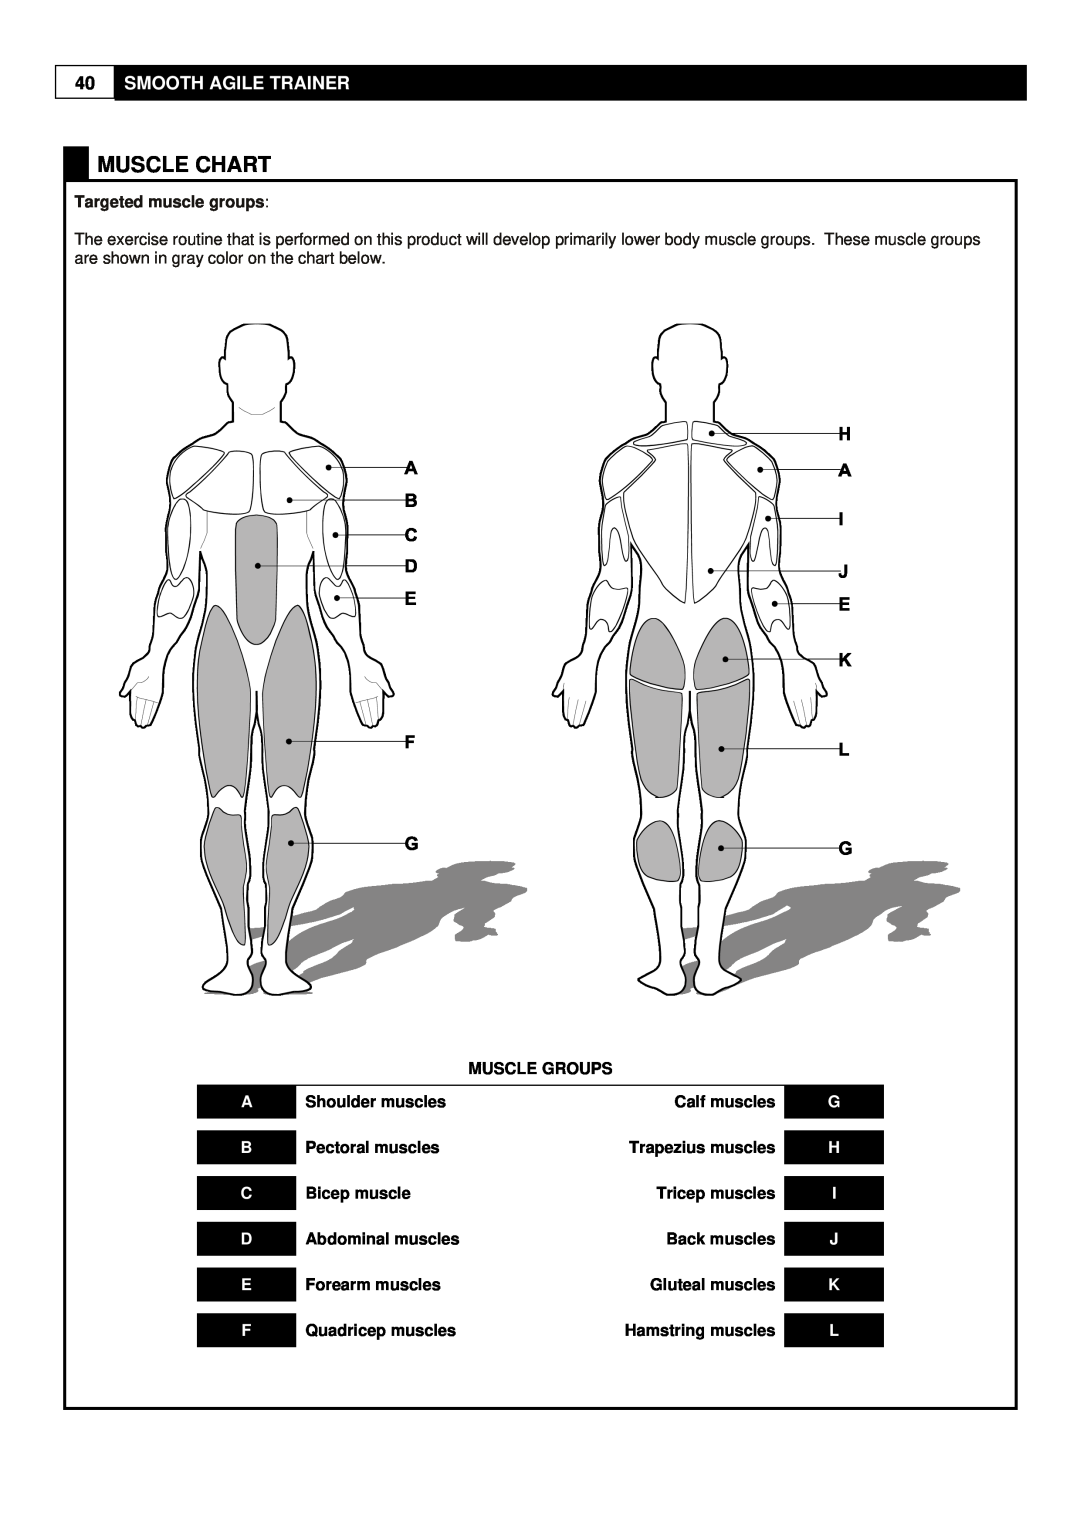 Smooth Fitness 9.25X Muscle Chart, Smooth Agile Trainer, Muscle Groups, Shoulder muscles, Calf muscles, Pectoral muscles 